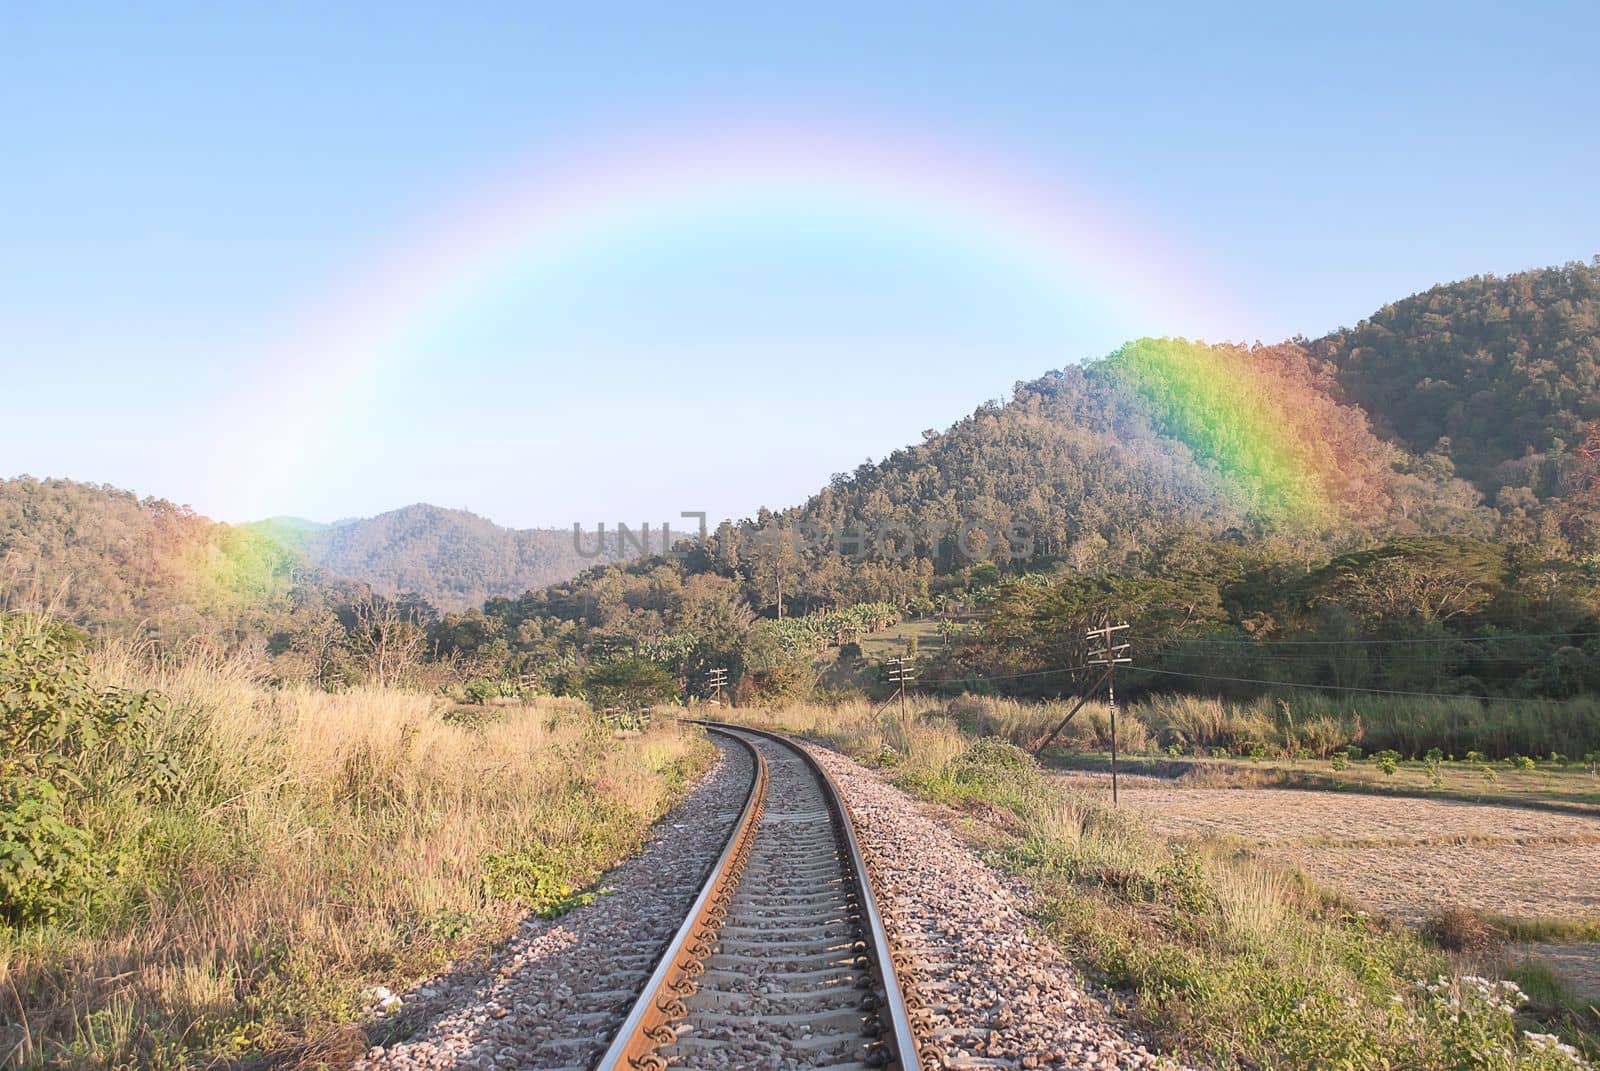 railroad rails with rainbow in to the mountain